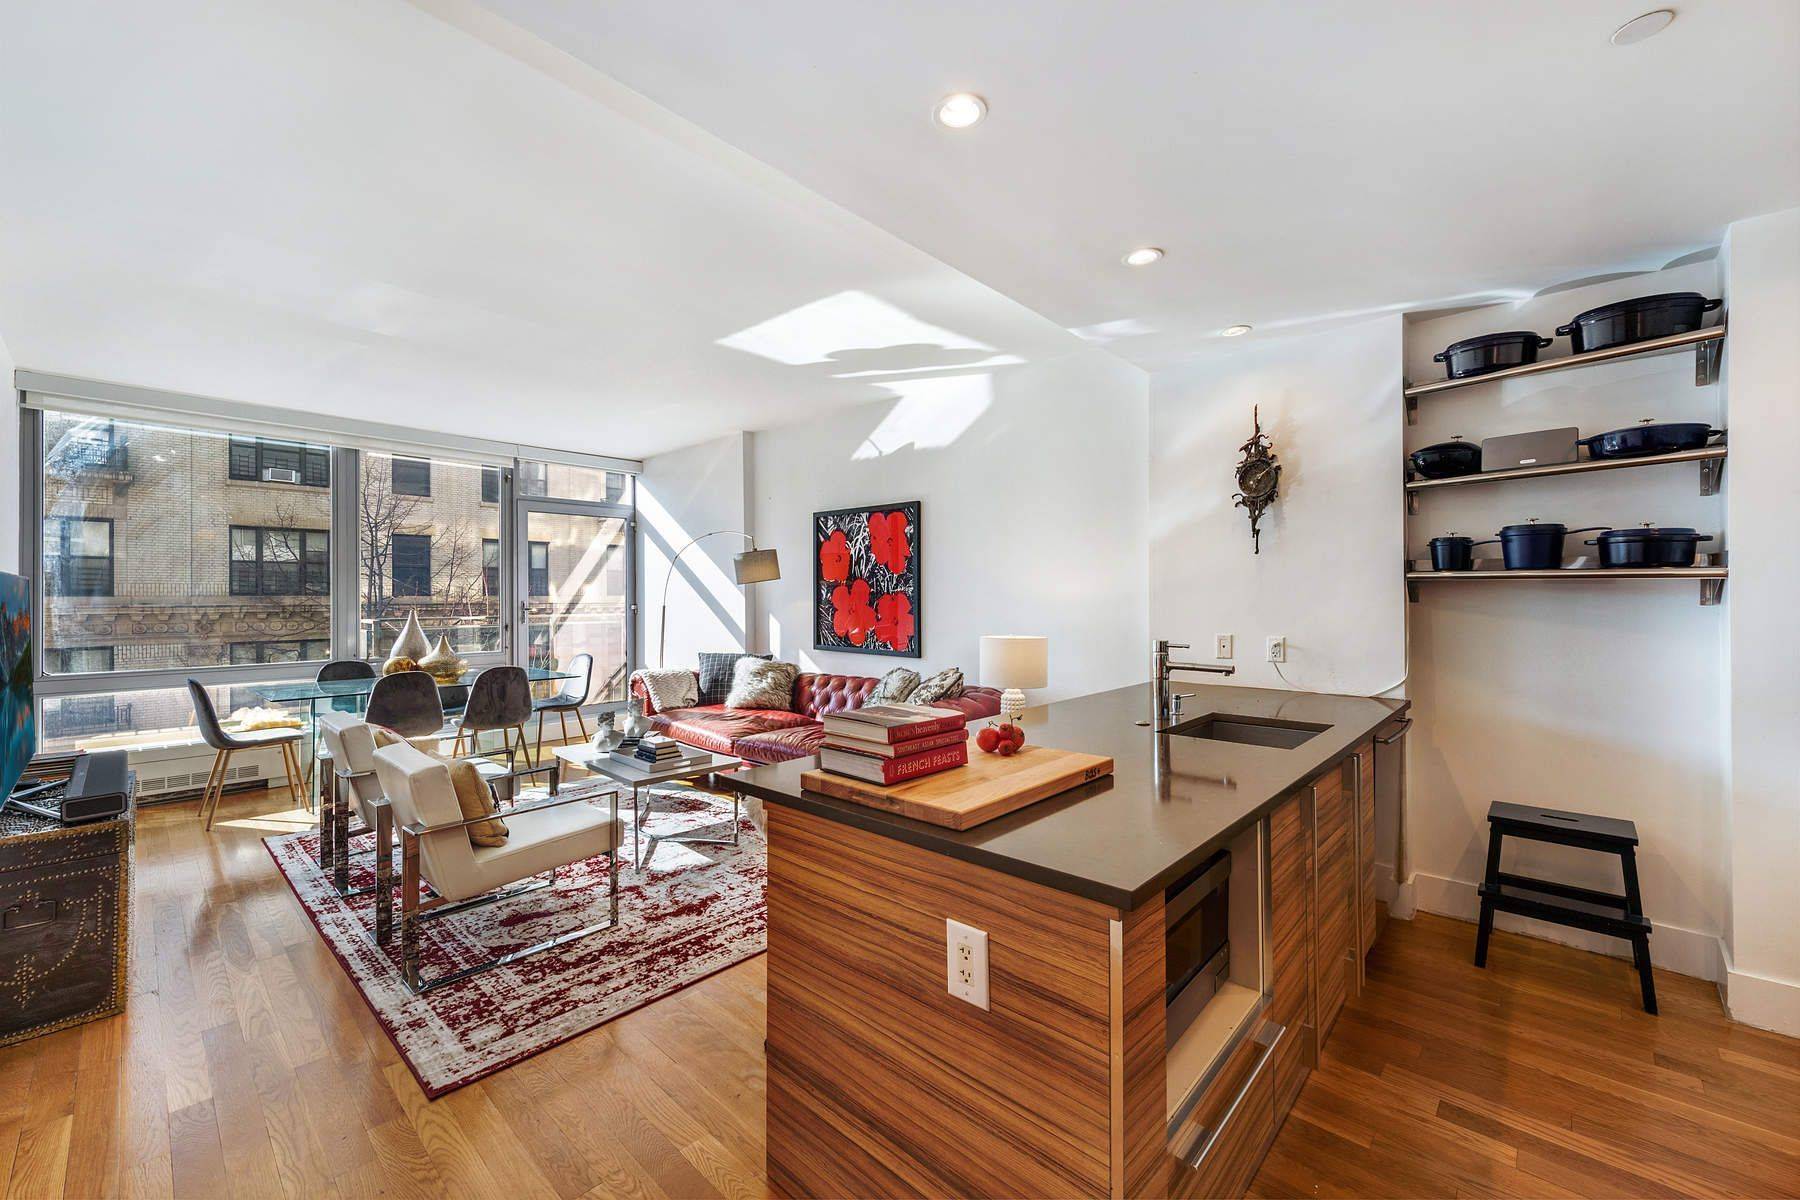 With open floor to ceiling windows overlooking an historic brownstone block in South Harlem, this upscale, loft life sun filled two bedroom two bath condo has generous living amp ; ...